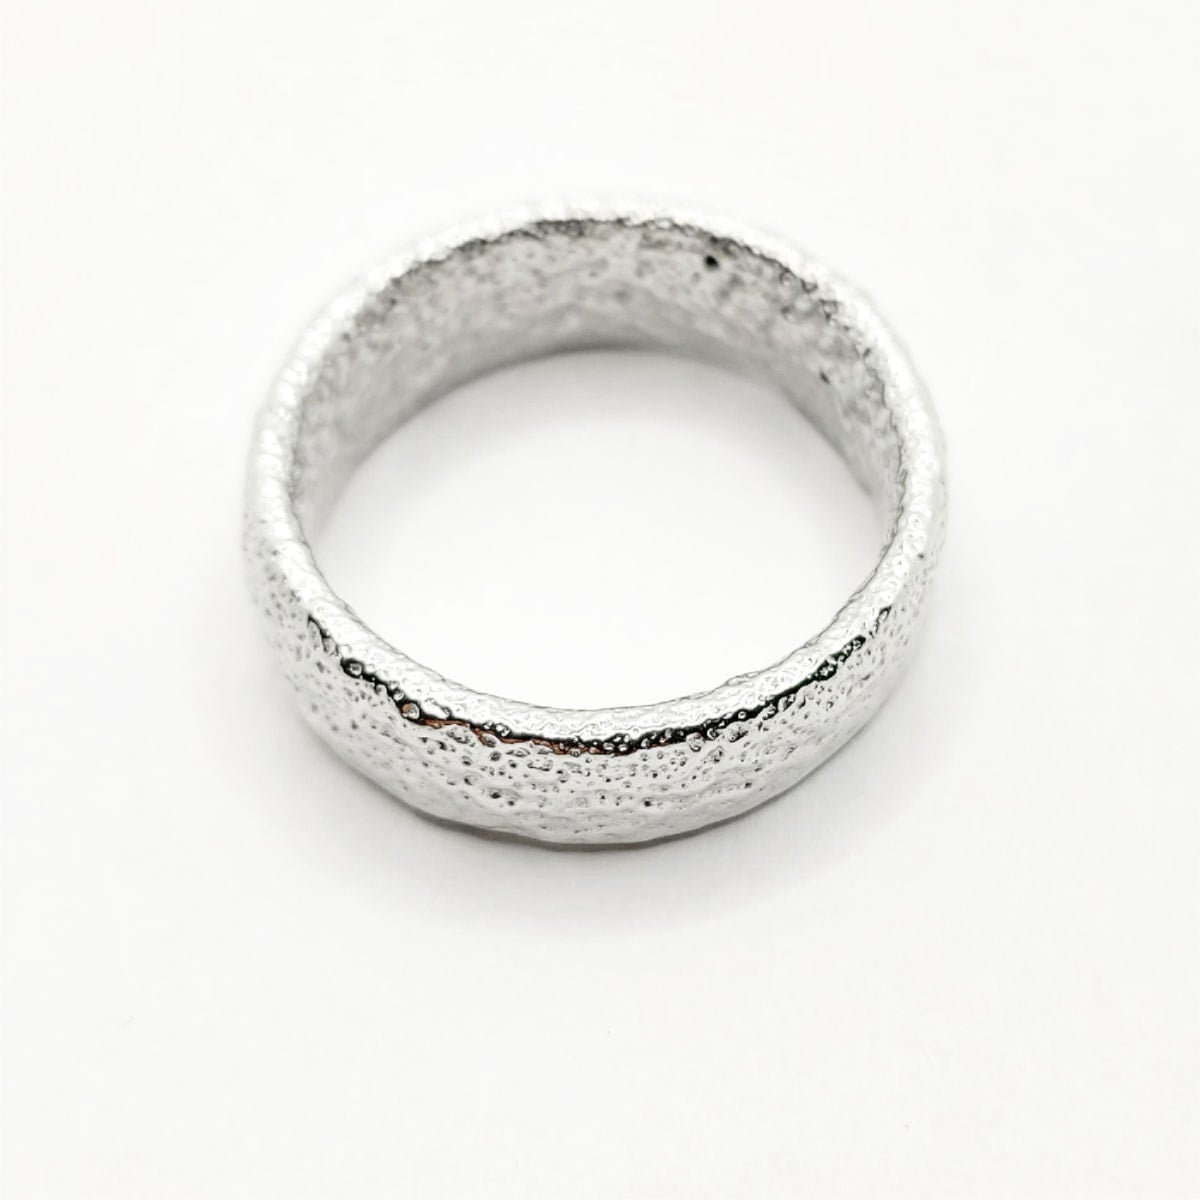 Napkin Rings, Contemporary, Pewter, Textured